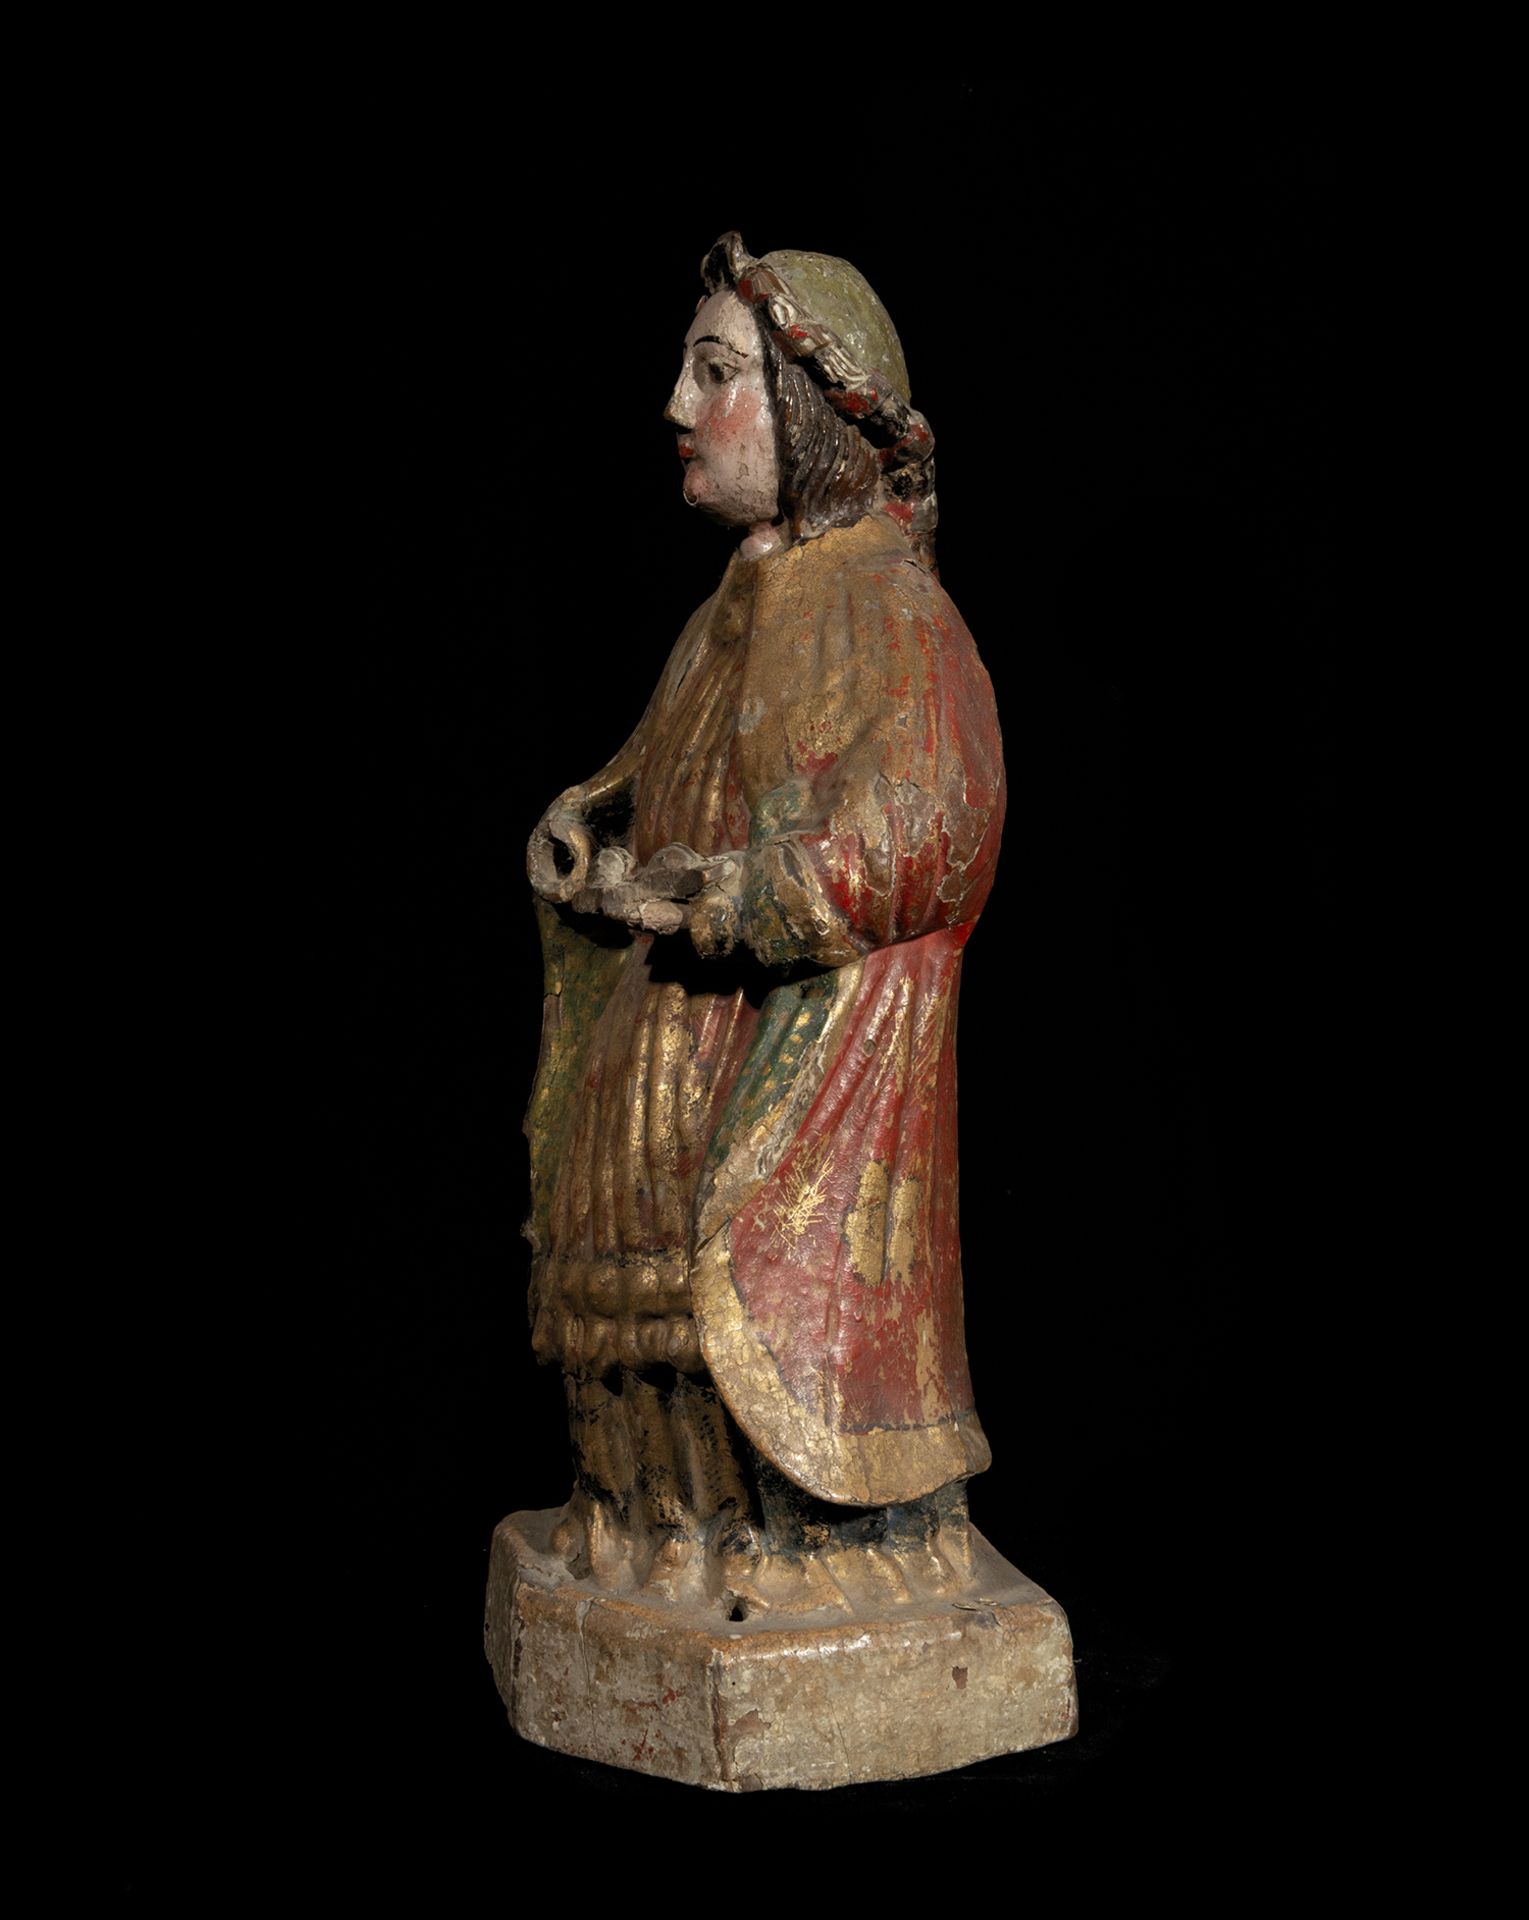 Rare Saint Agathe in carved wood, Viceregal colonial work from the 17th century - Image 2 of 5